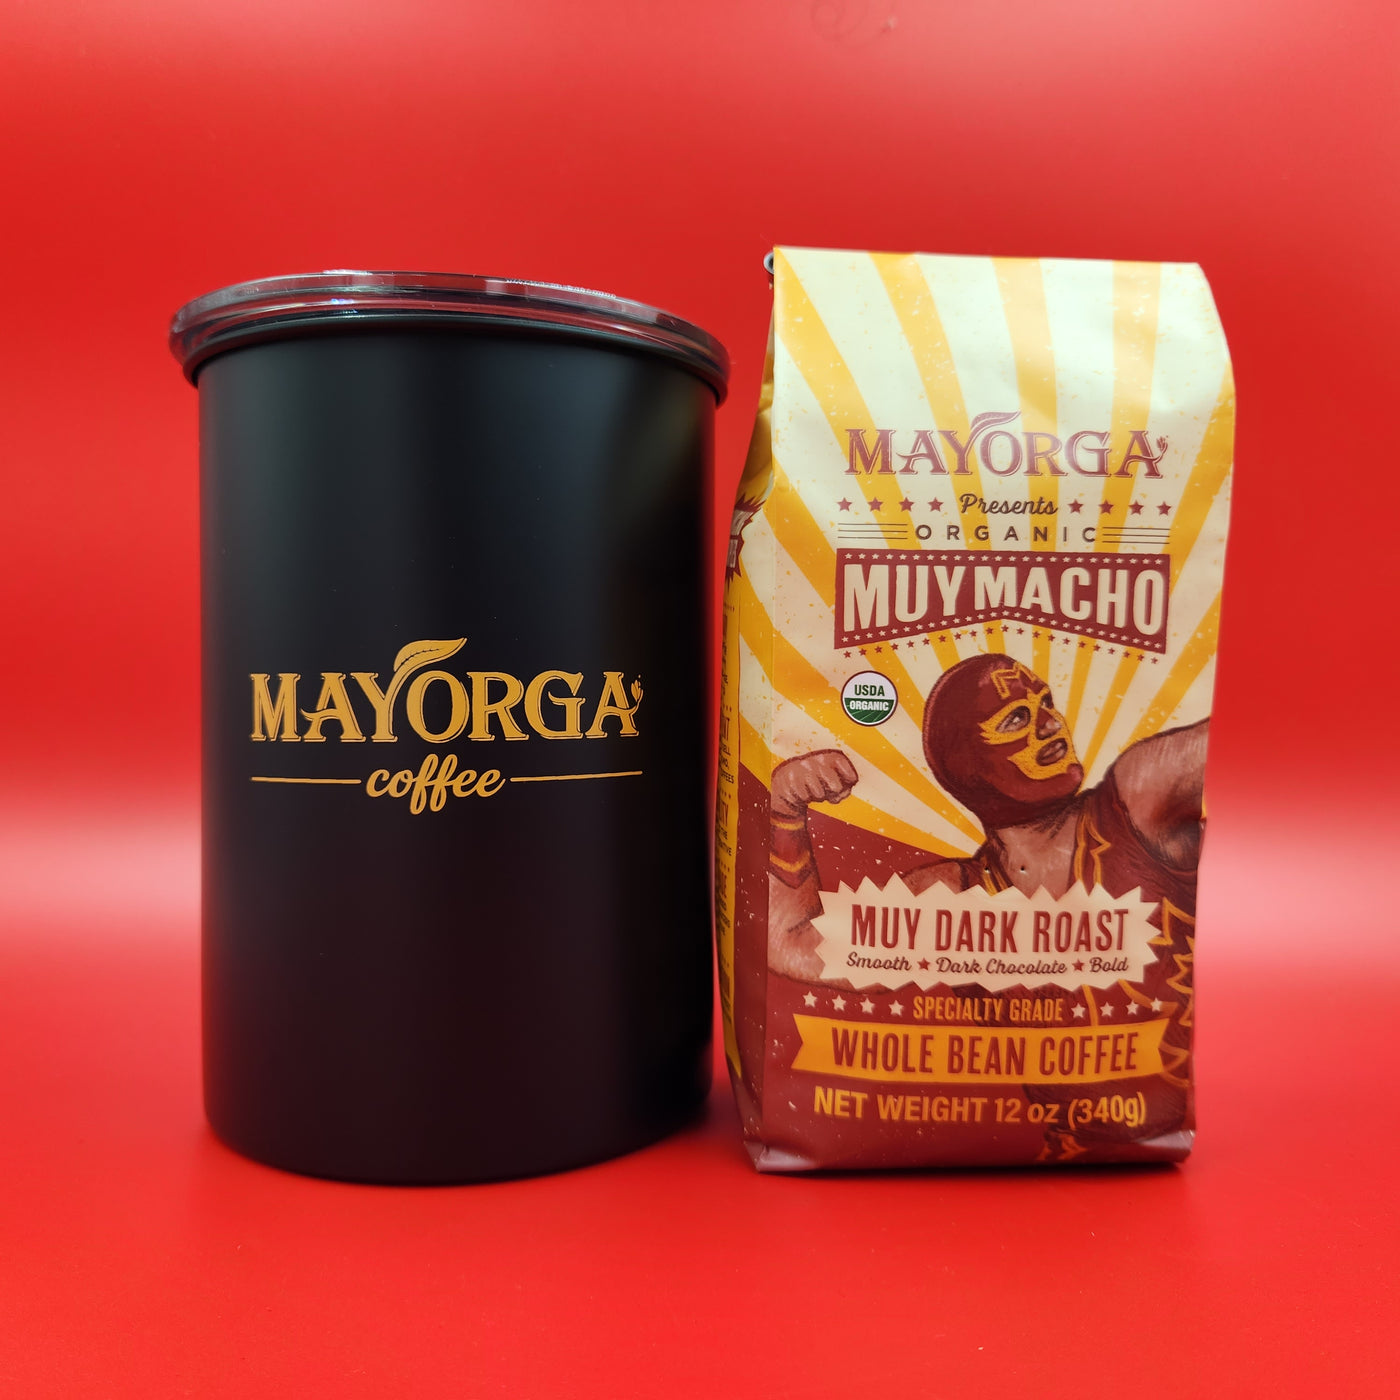 Mayorga Coffee Canister (Small)